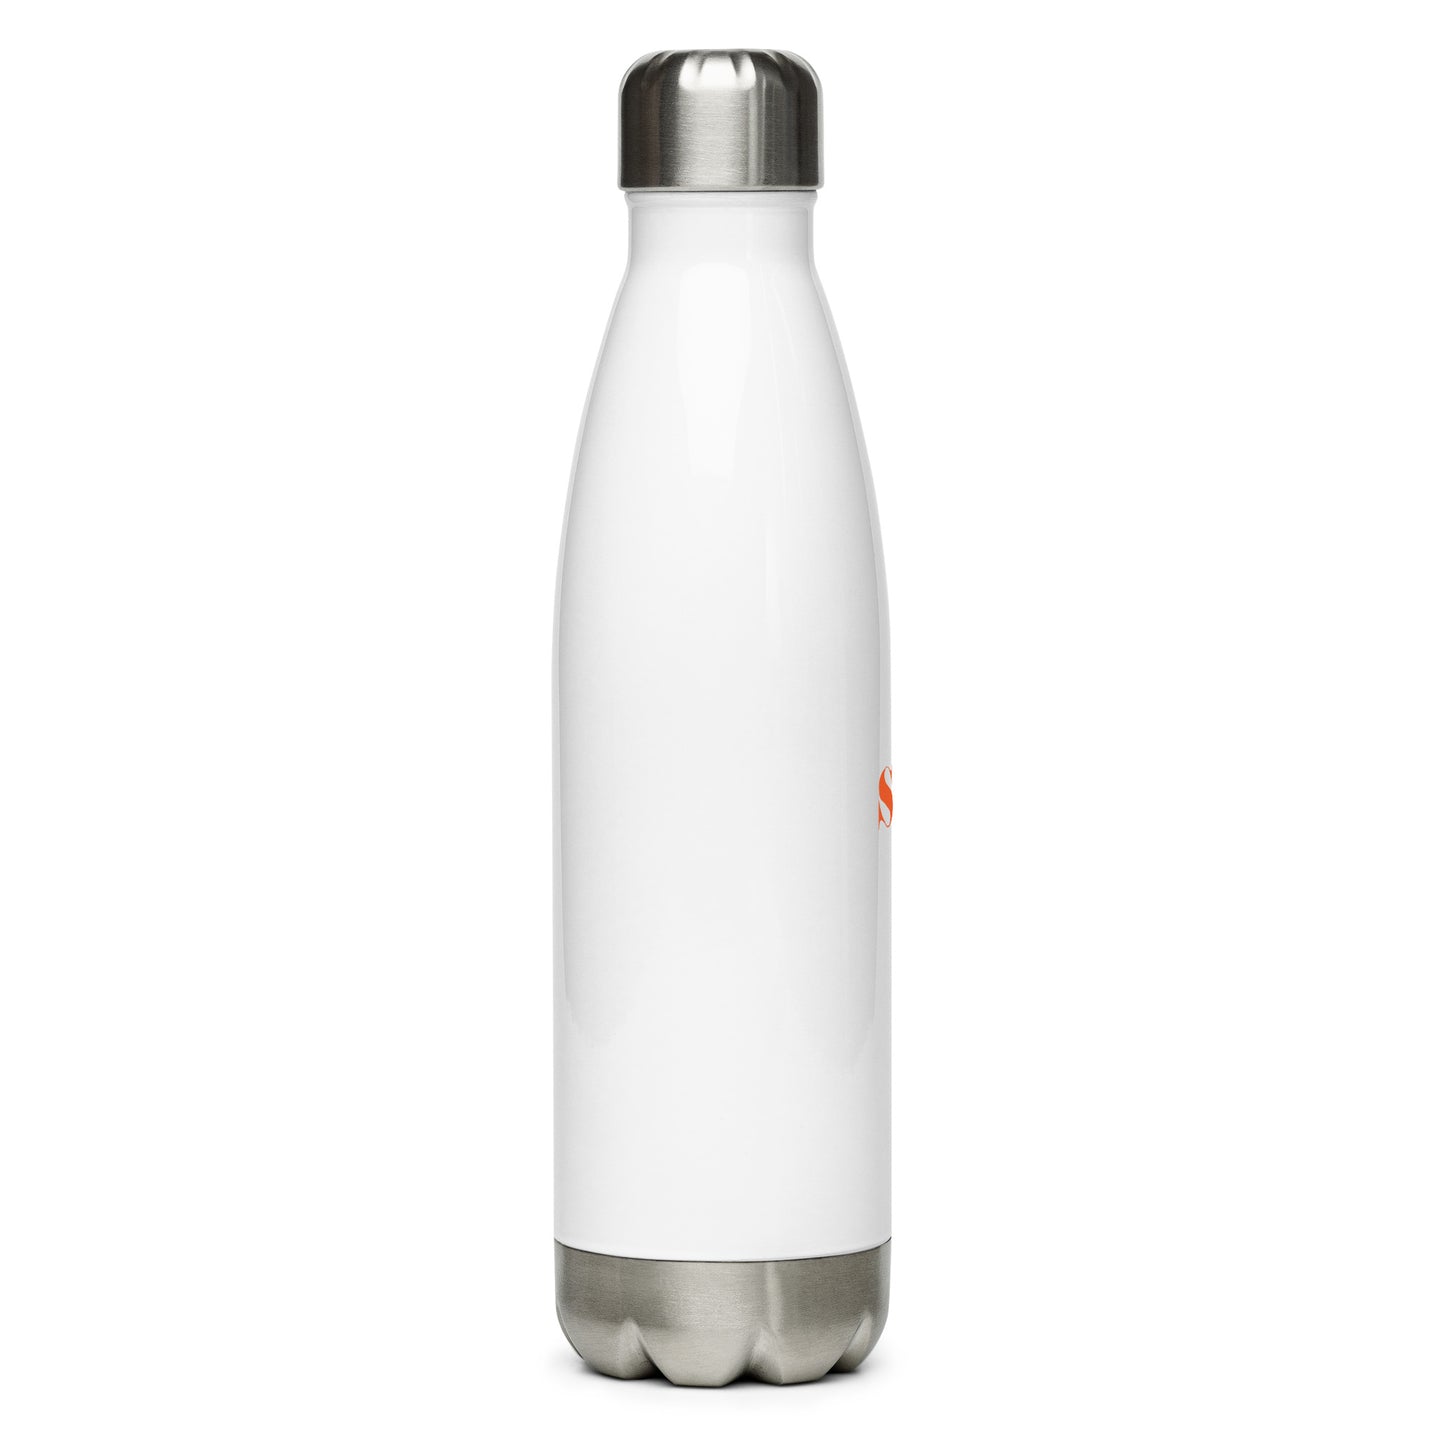 Main Streets Are For Everyone Stainless Steel Water Bottle